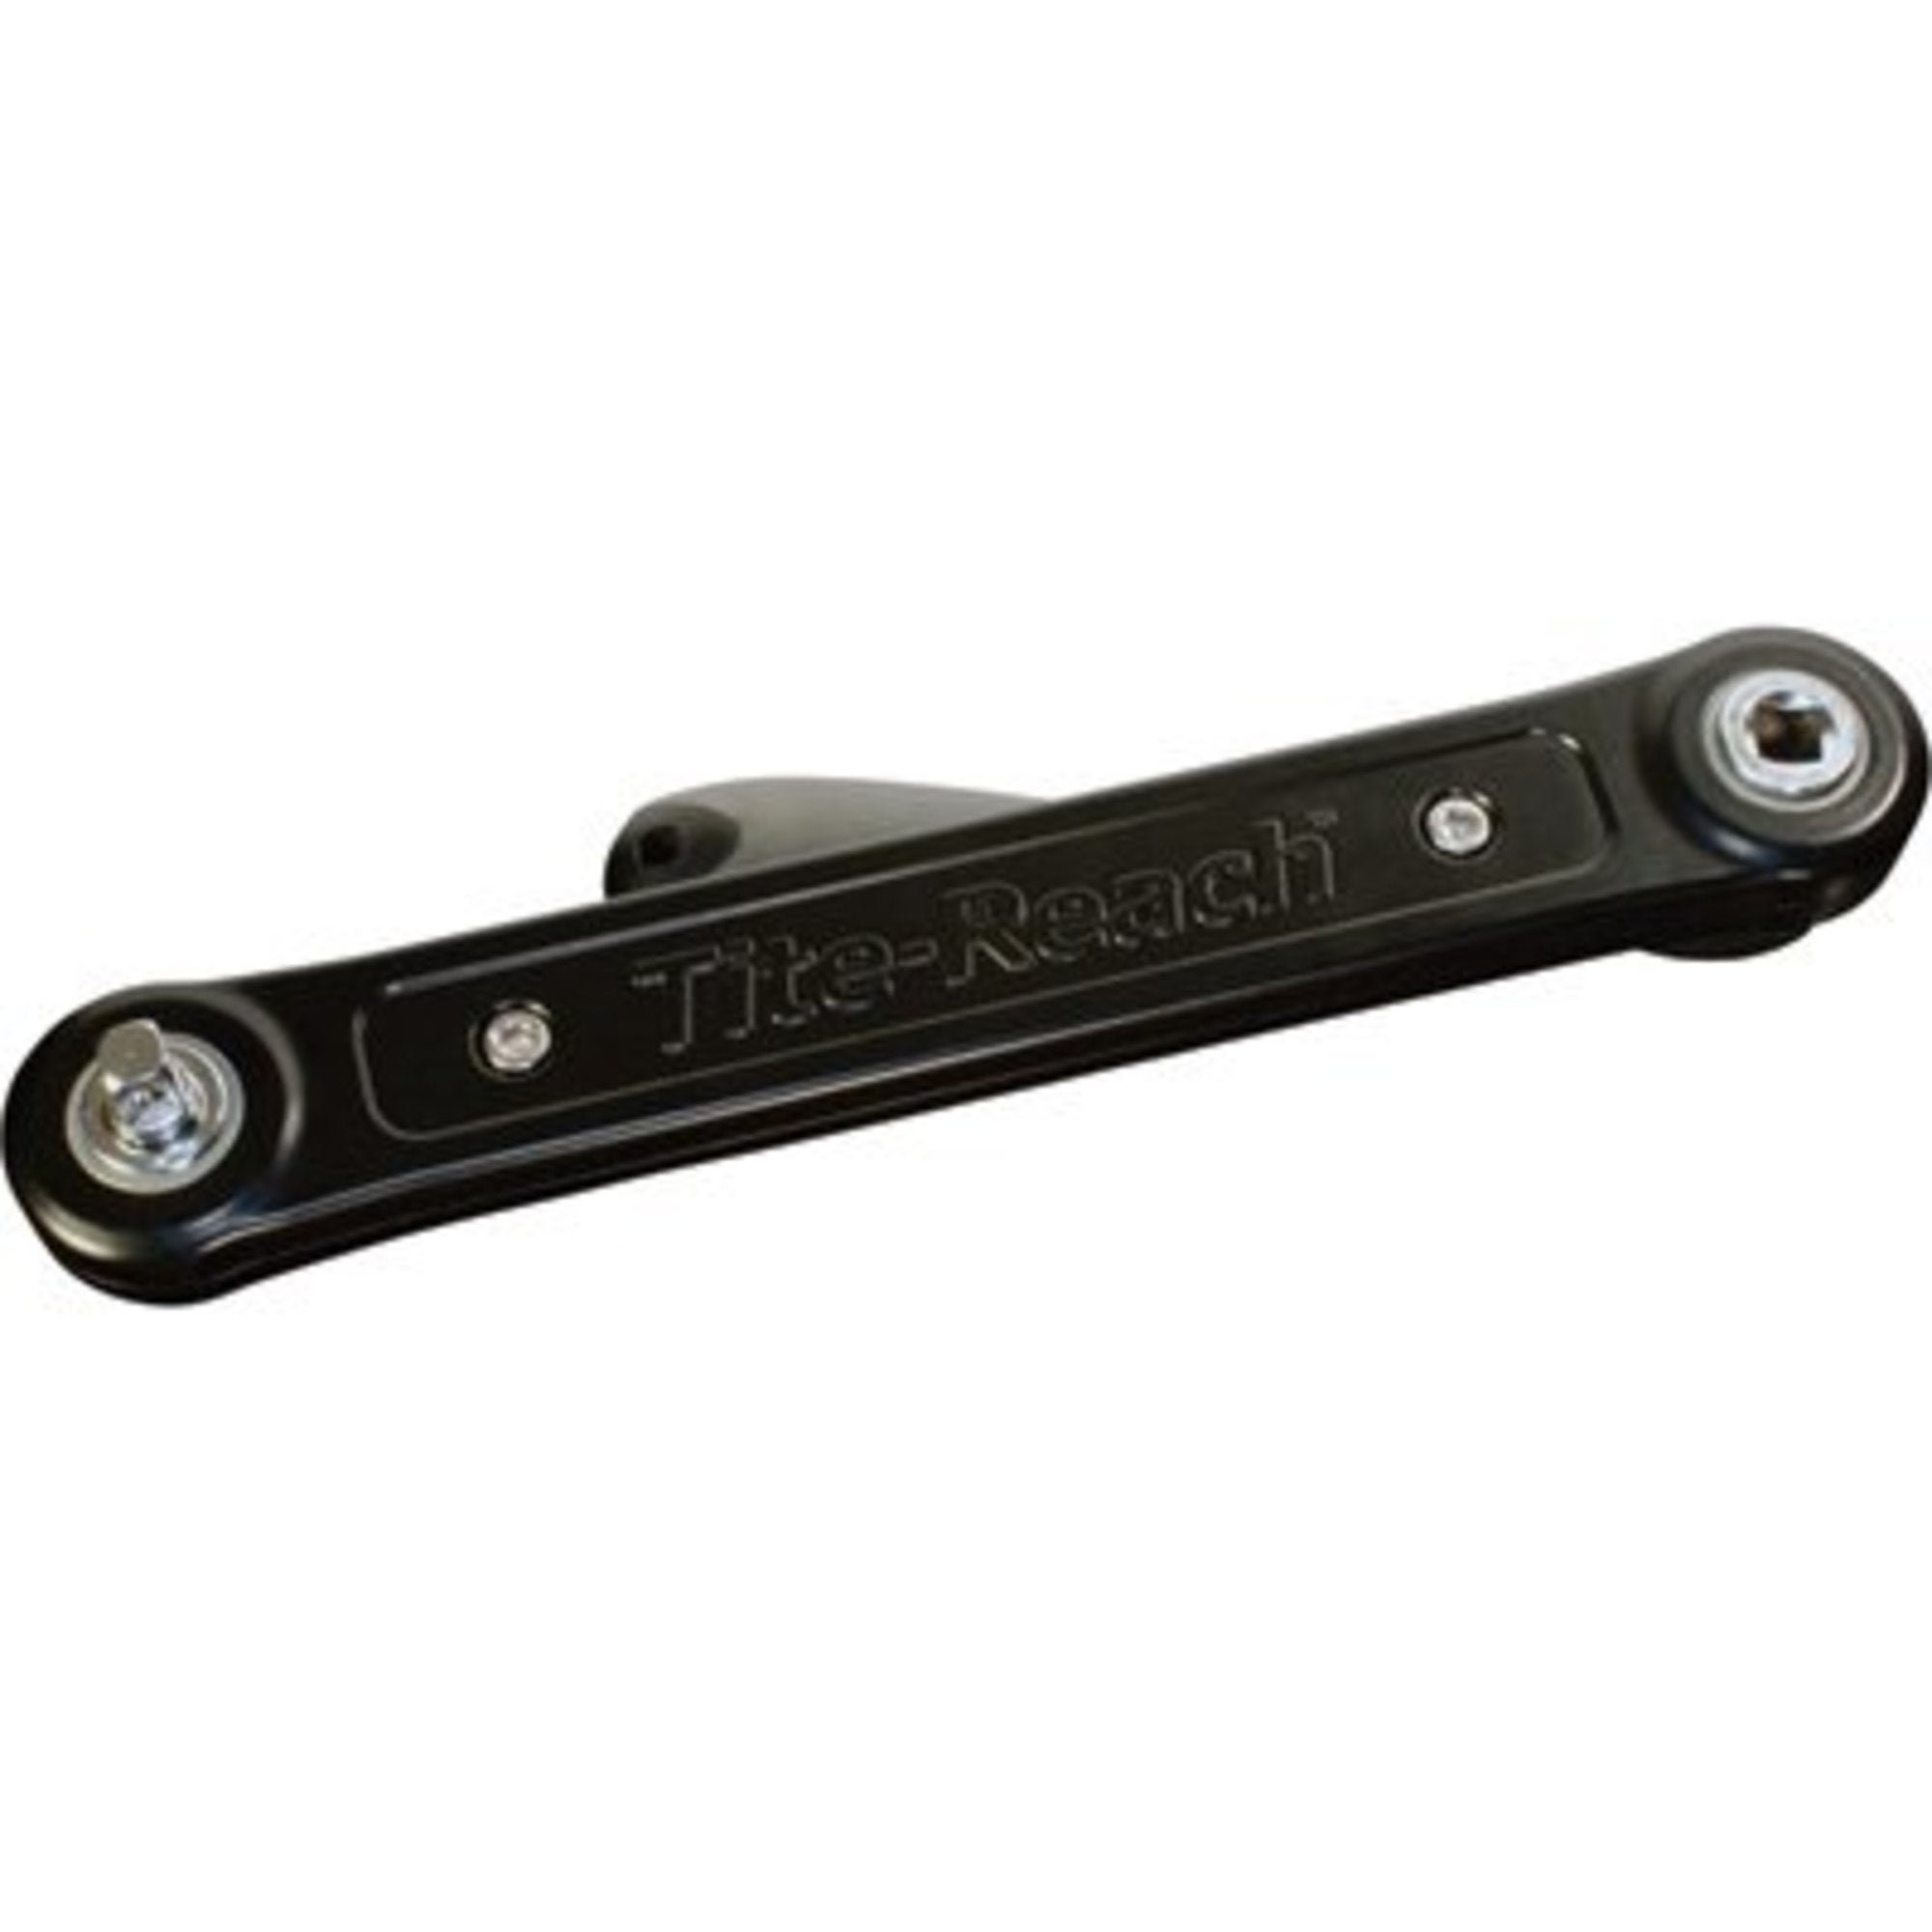 Tite Reach Extension Wrench